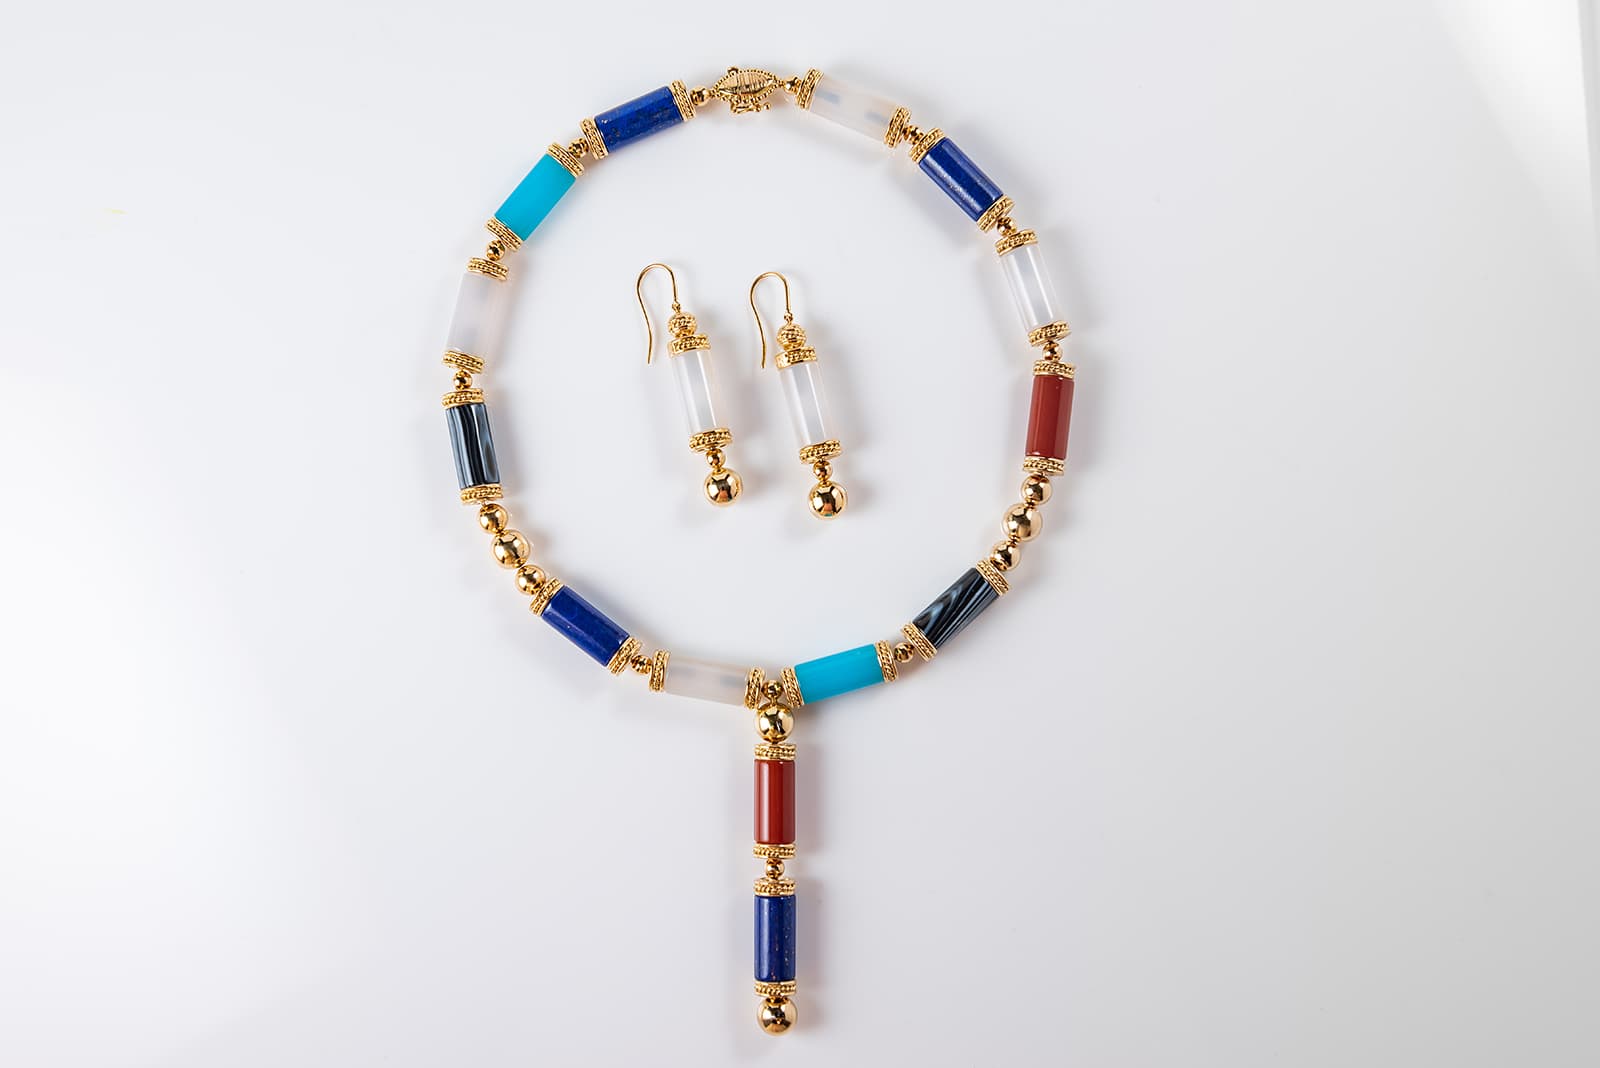 WITR Jewellery necklace with lapis lazuli, turquoise, rock crystal, carnelian and banded agate, and earrings with rock crystal, both in yellow gold